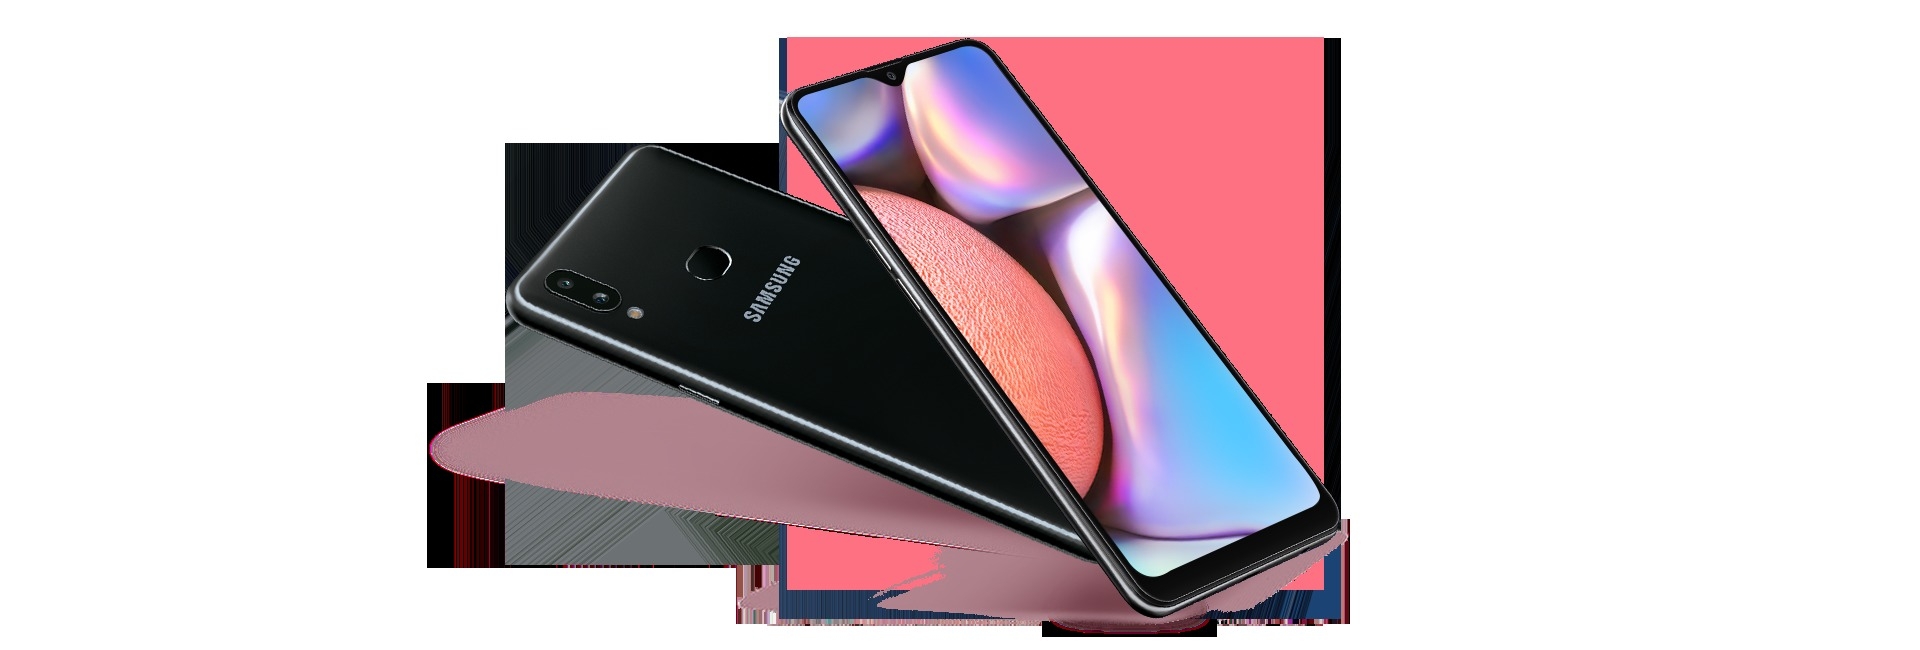 Samsung Galaxy A10s with Glossy Design